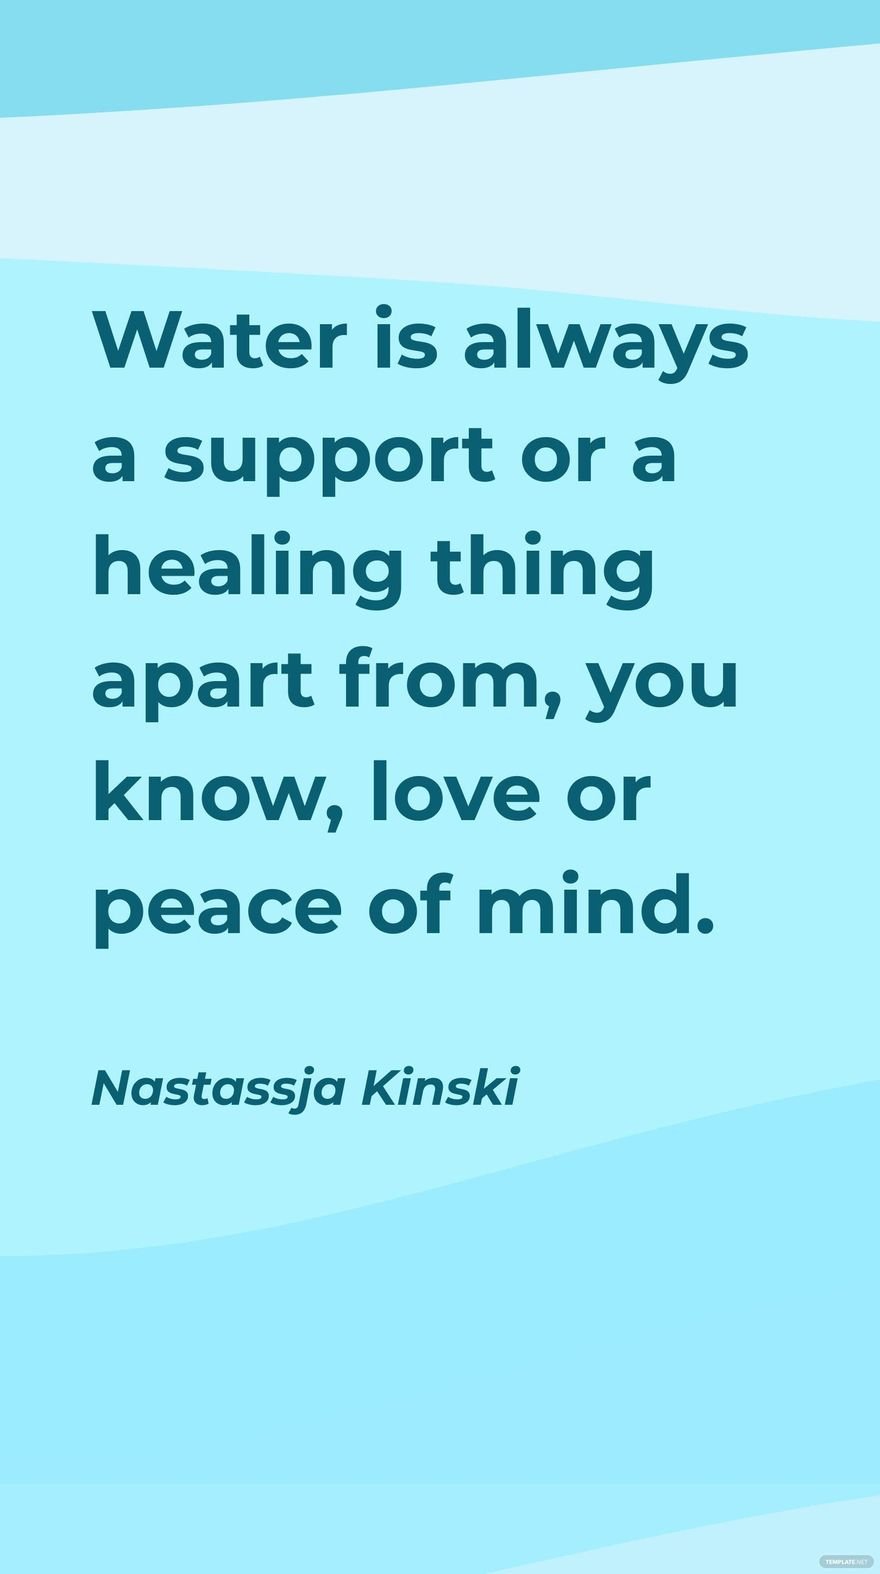 Nastassja Kinski - Water is always a support or a healing thing apart from, you know, love or peace of mind. in JPG